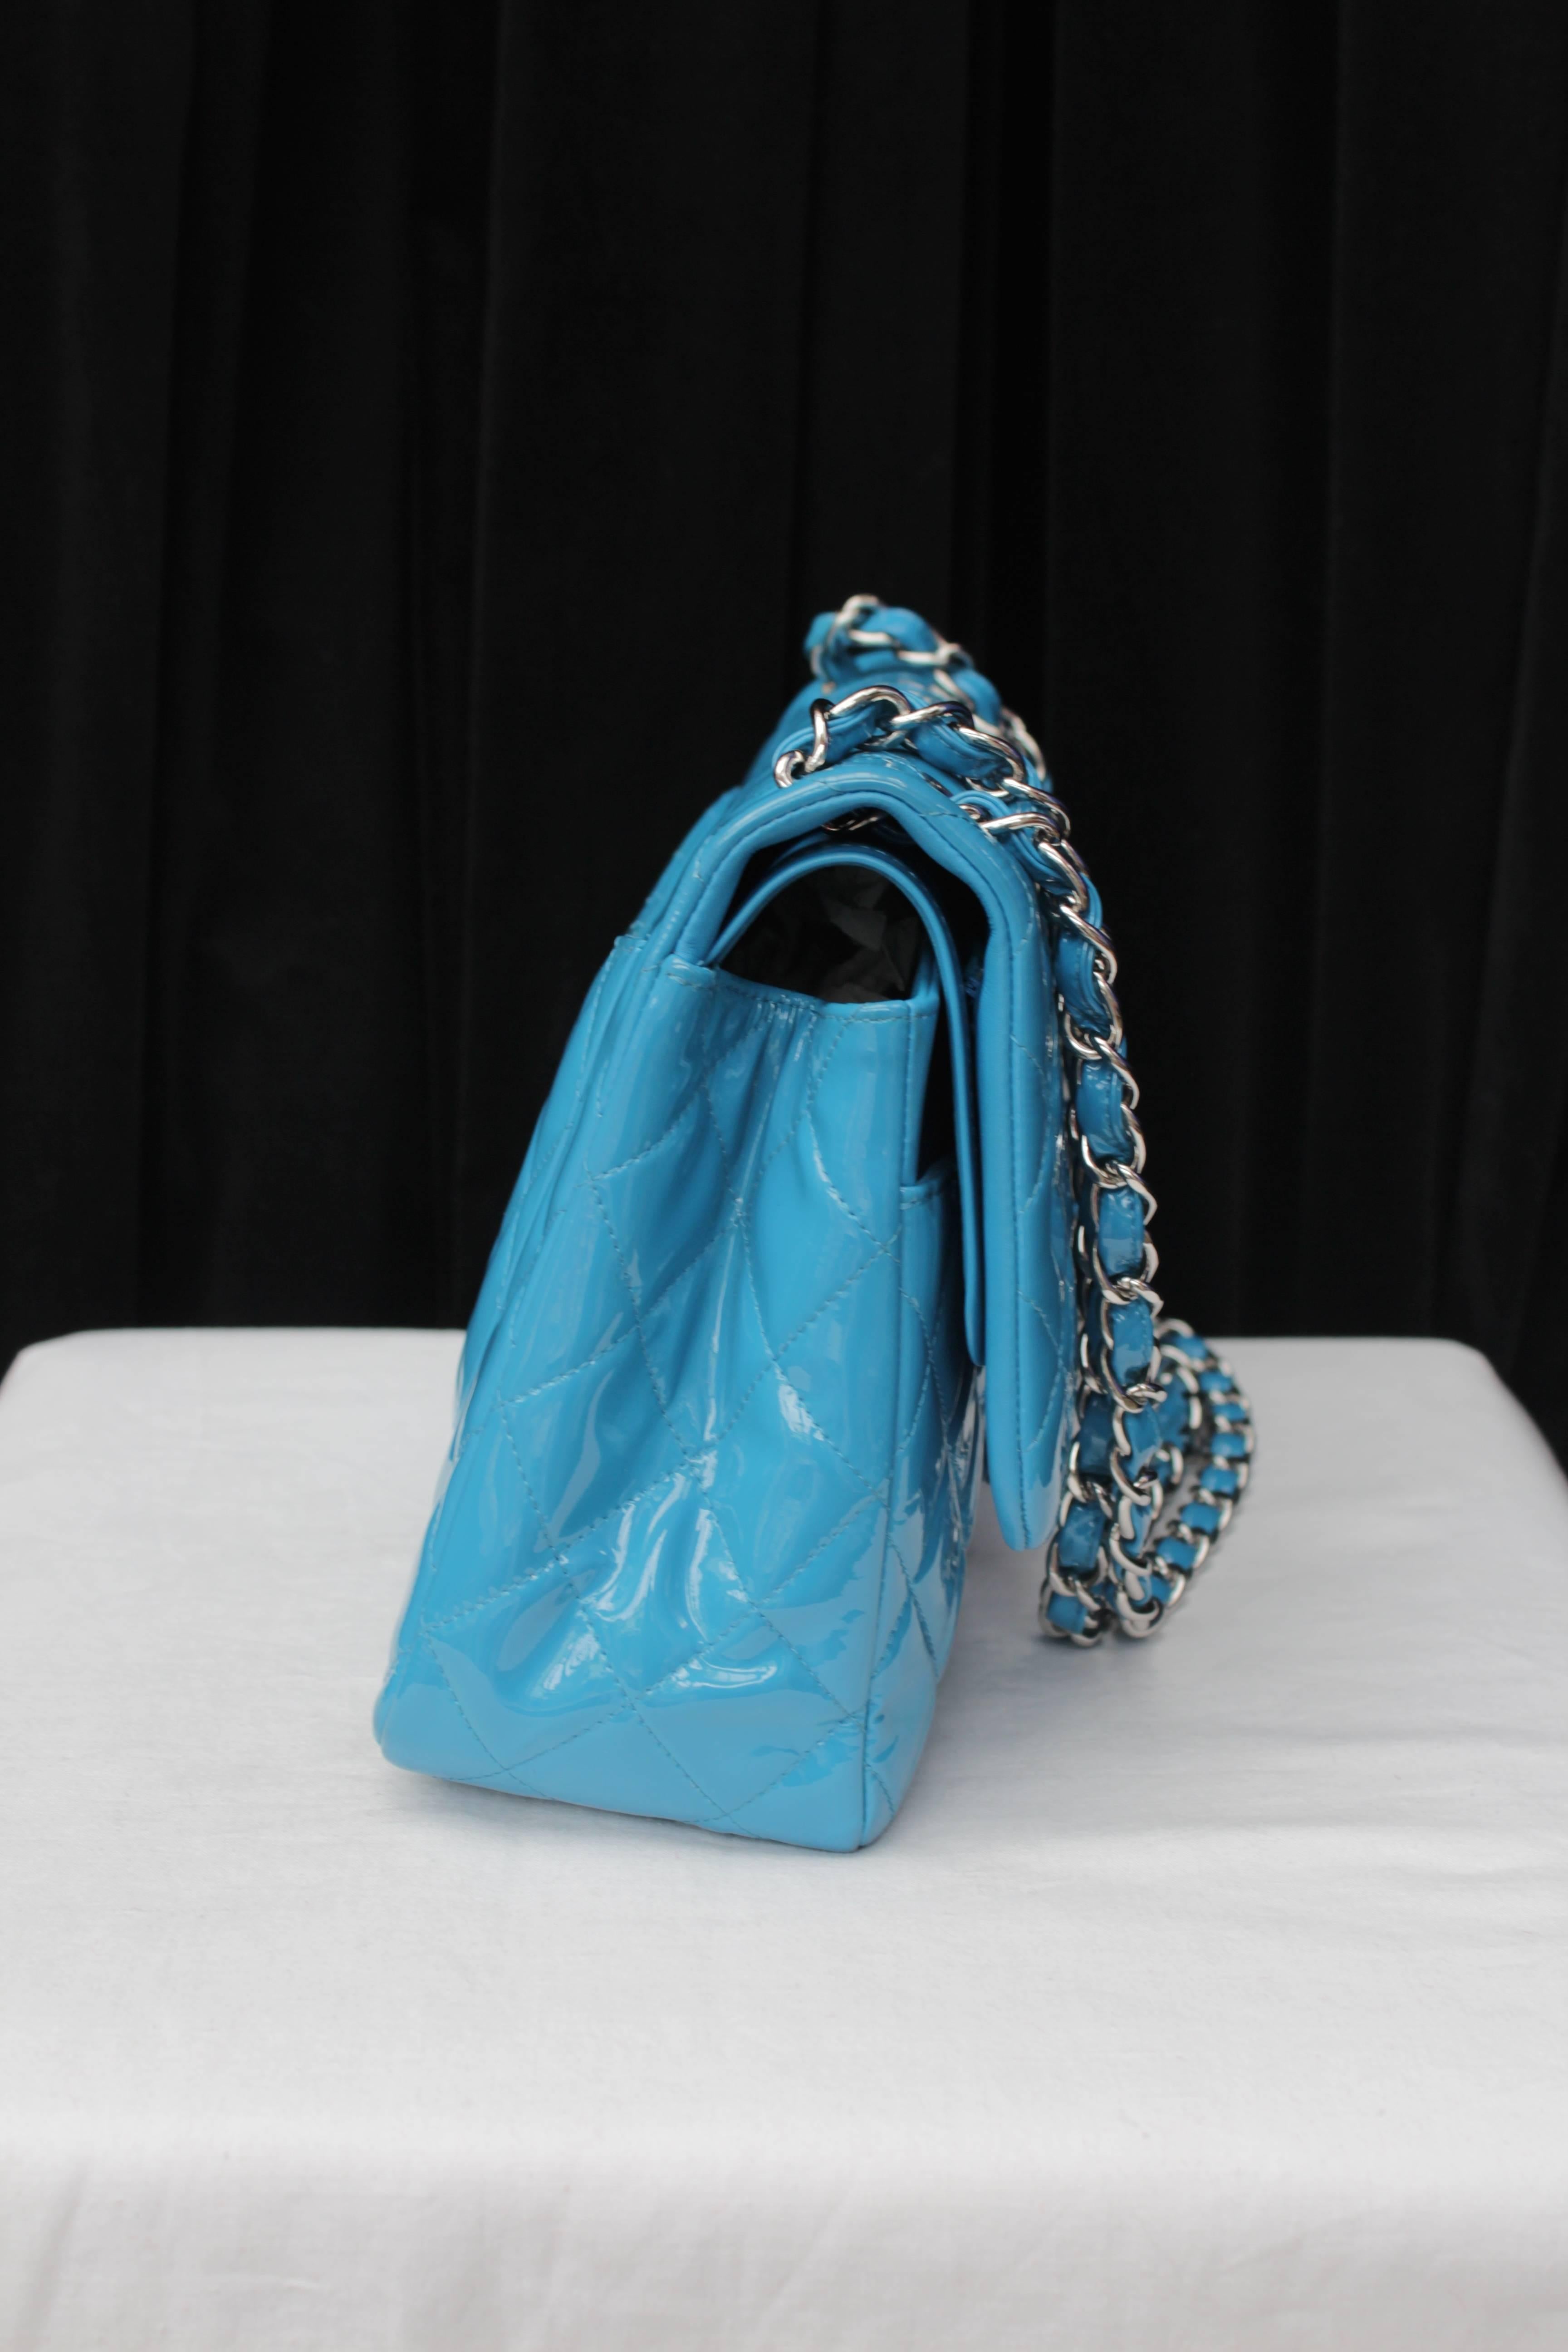 Women's 2000s Chanel Jumbo Timeless Bag in Patent Turquoise Leather and Silver Hardware